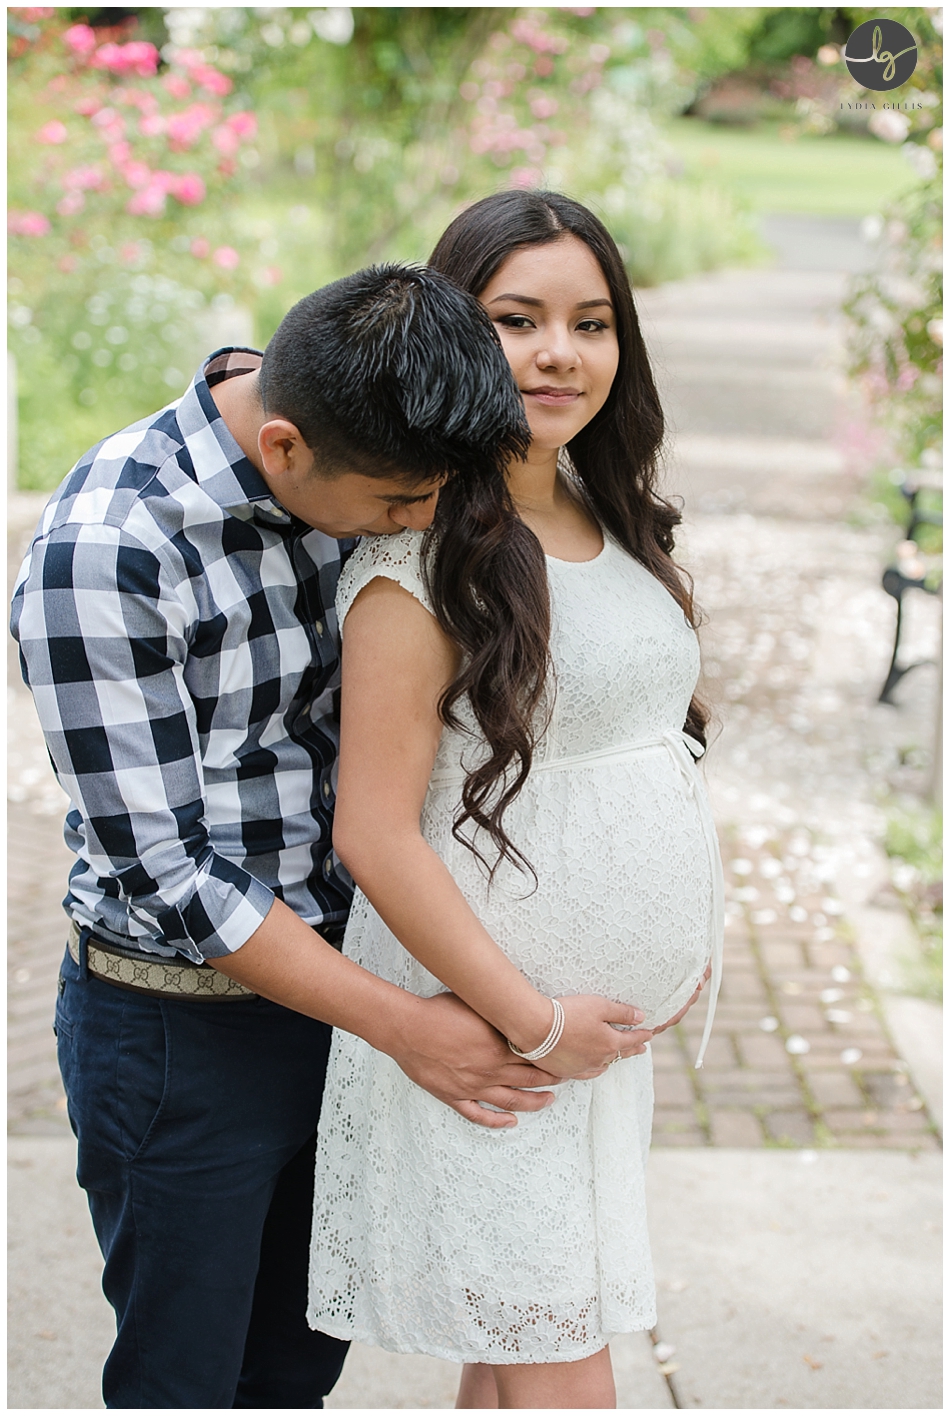 outdoor maternity session in Eugene